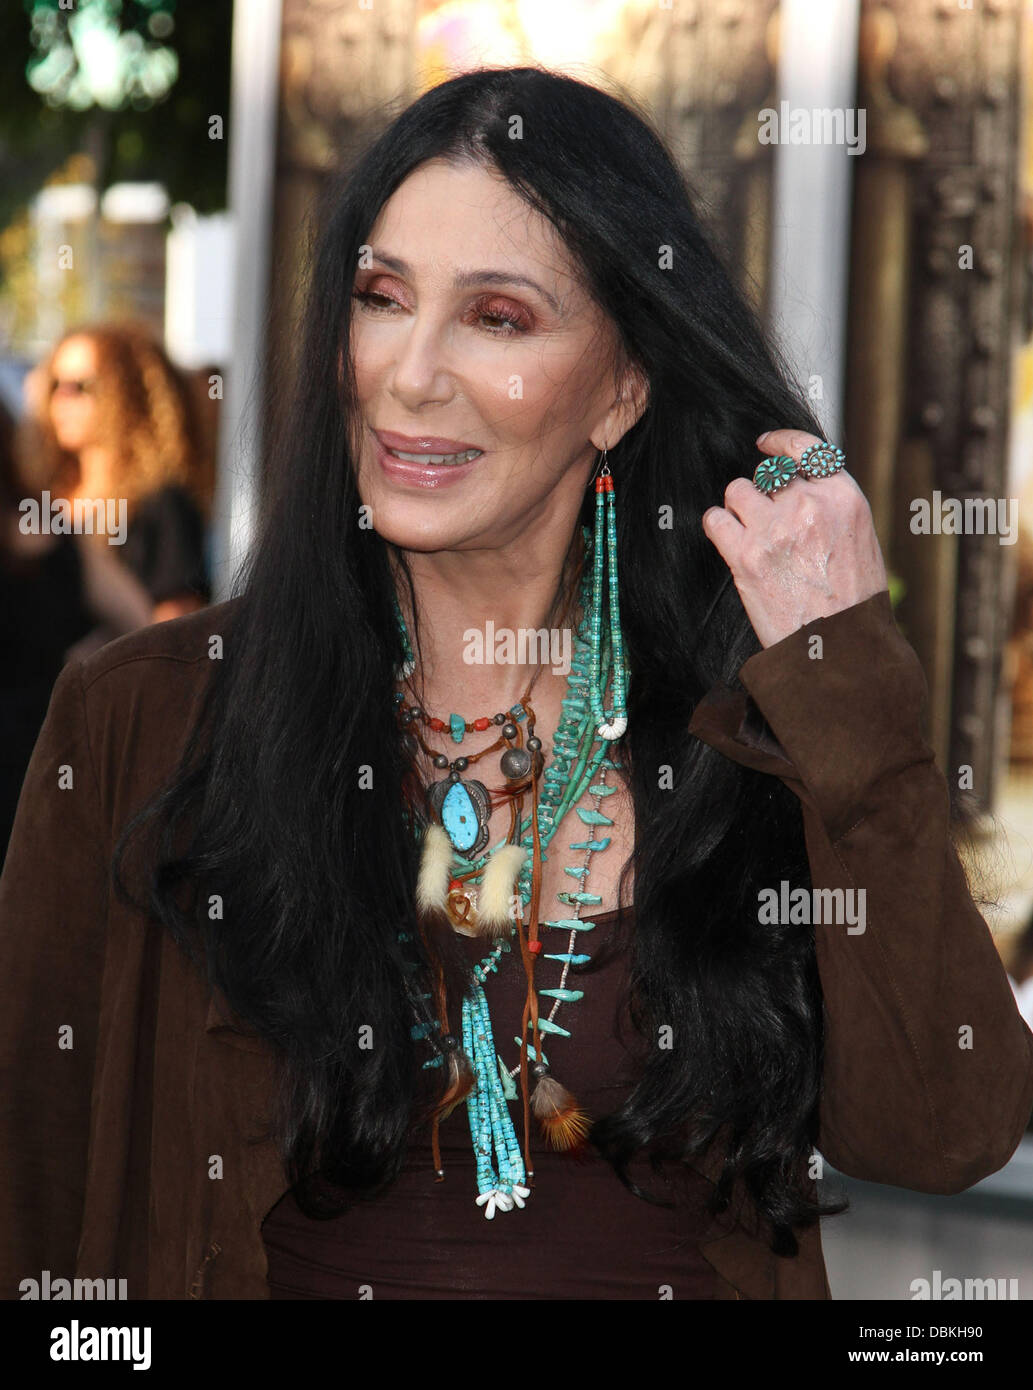 Singer Cher The Los Angeles Premiere of 'Zookeeper' held at the Regency Village Theatre - Arrivals Los Angeles, California - 06.07.11 Stock Photo